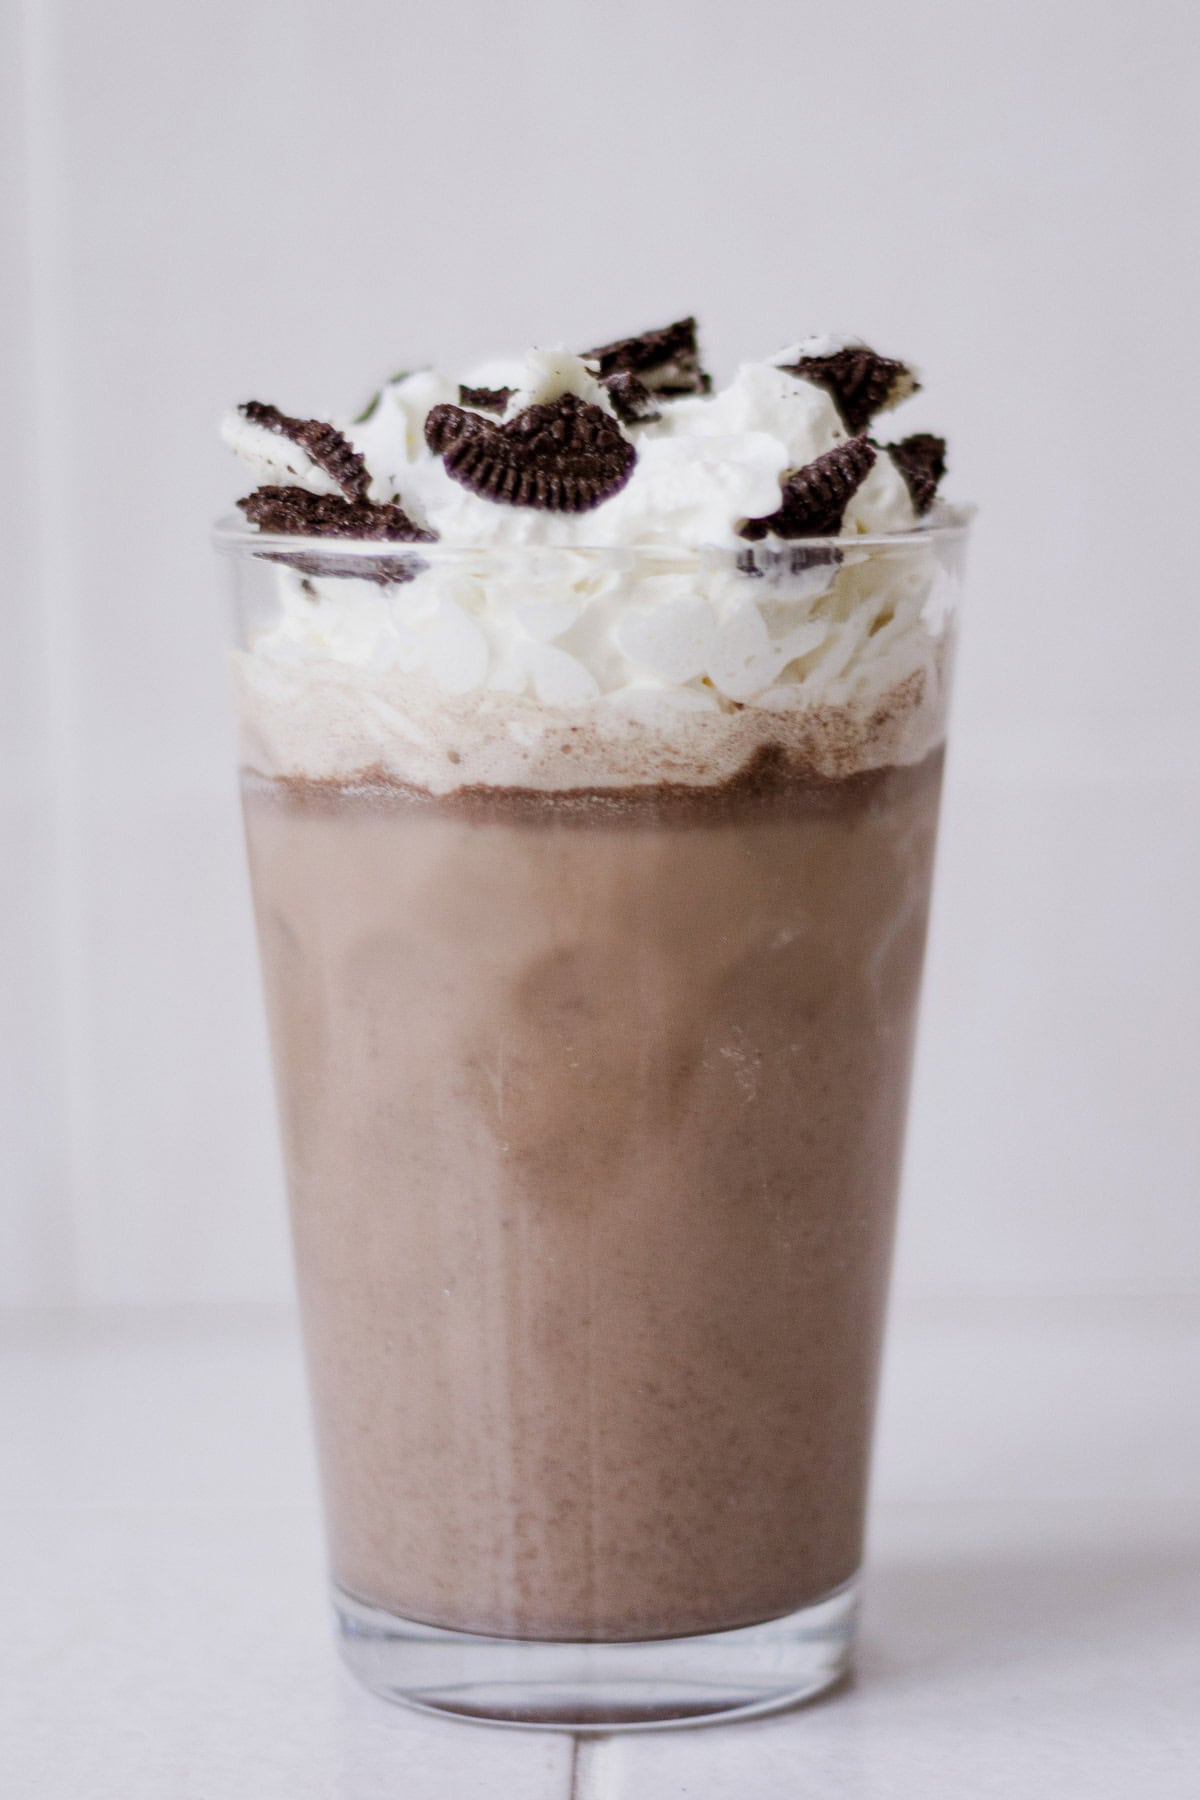 Front view of Oreo milk tea in a glass, topped with whipped cream and a crushed Oreo.